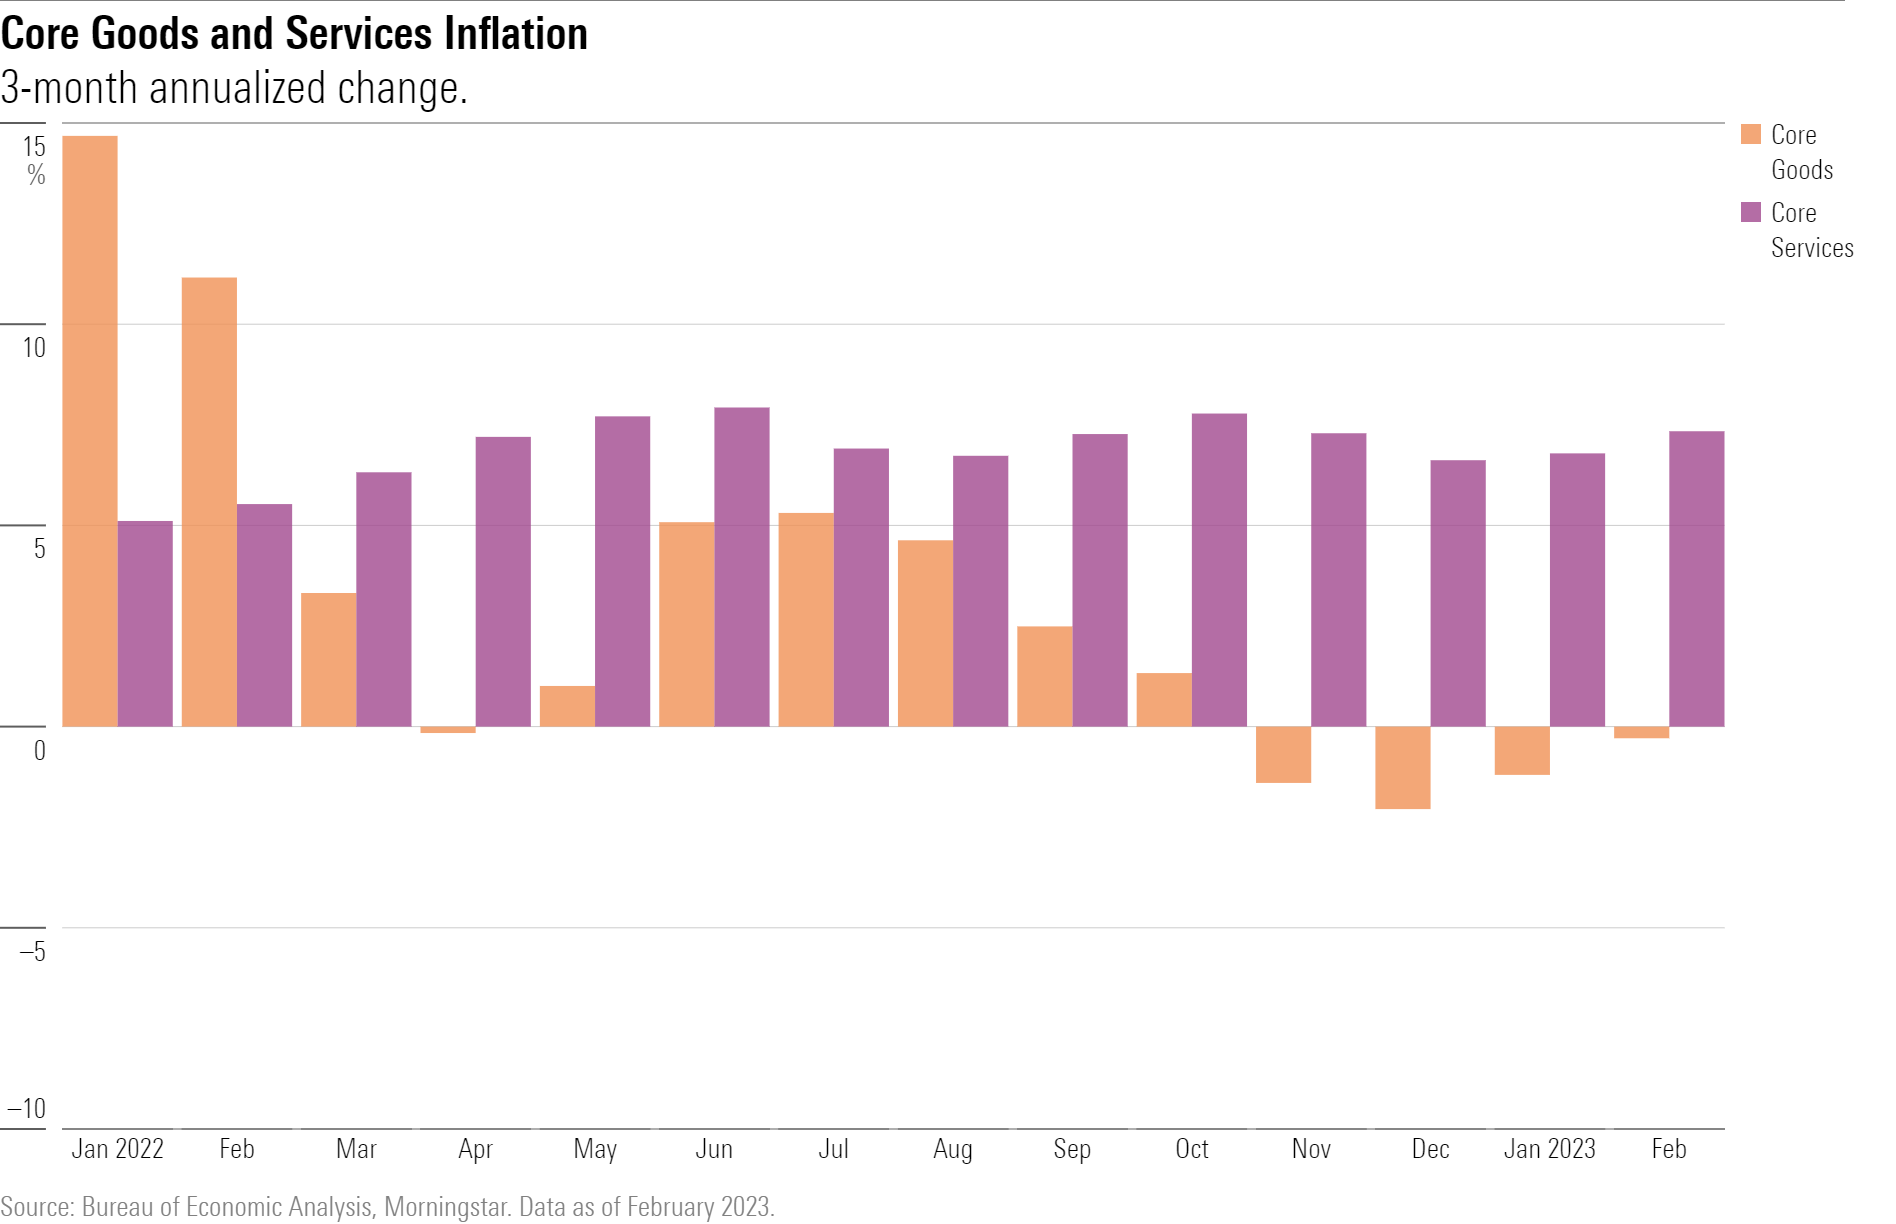 Bar chart showing 3-month annualized changes in core goods and core services inflation.